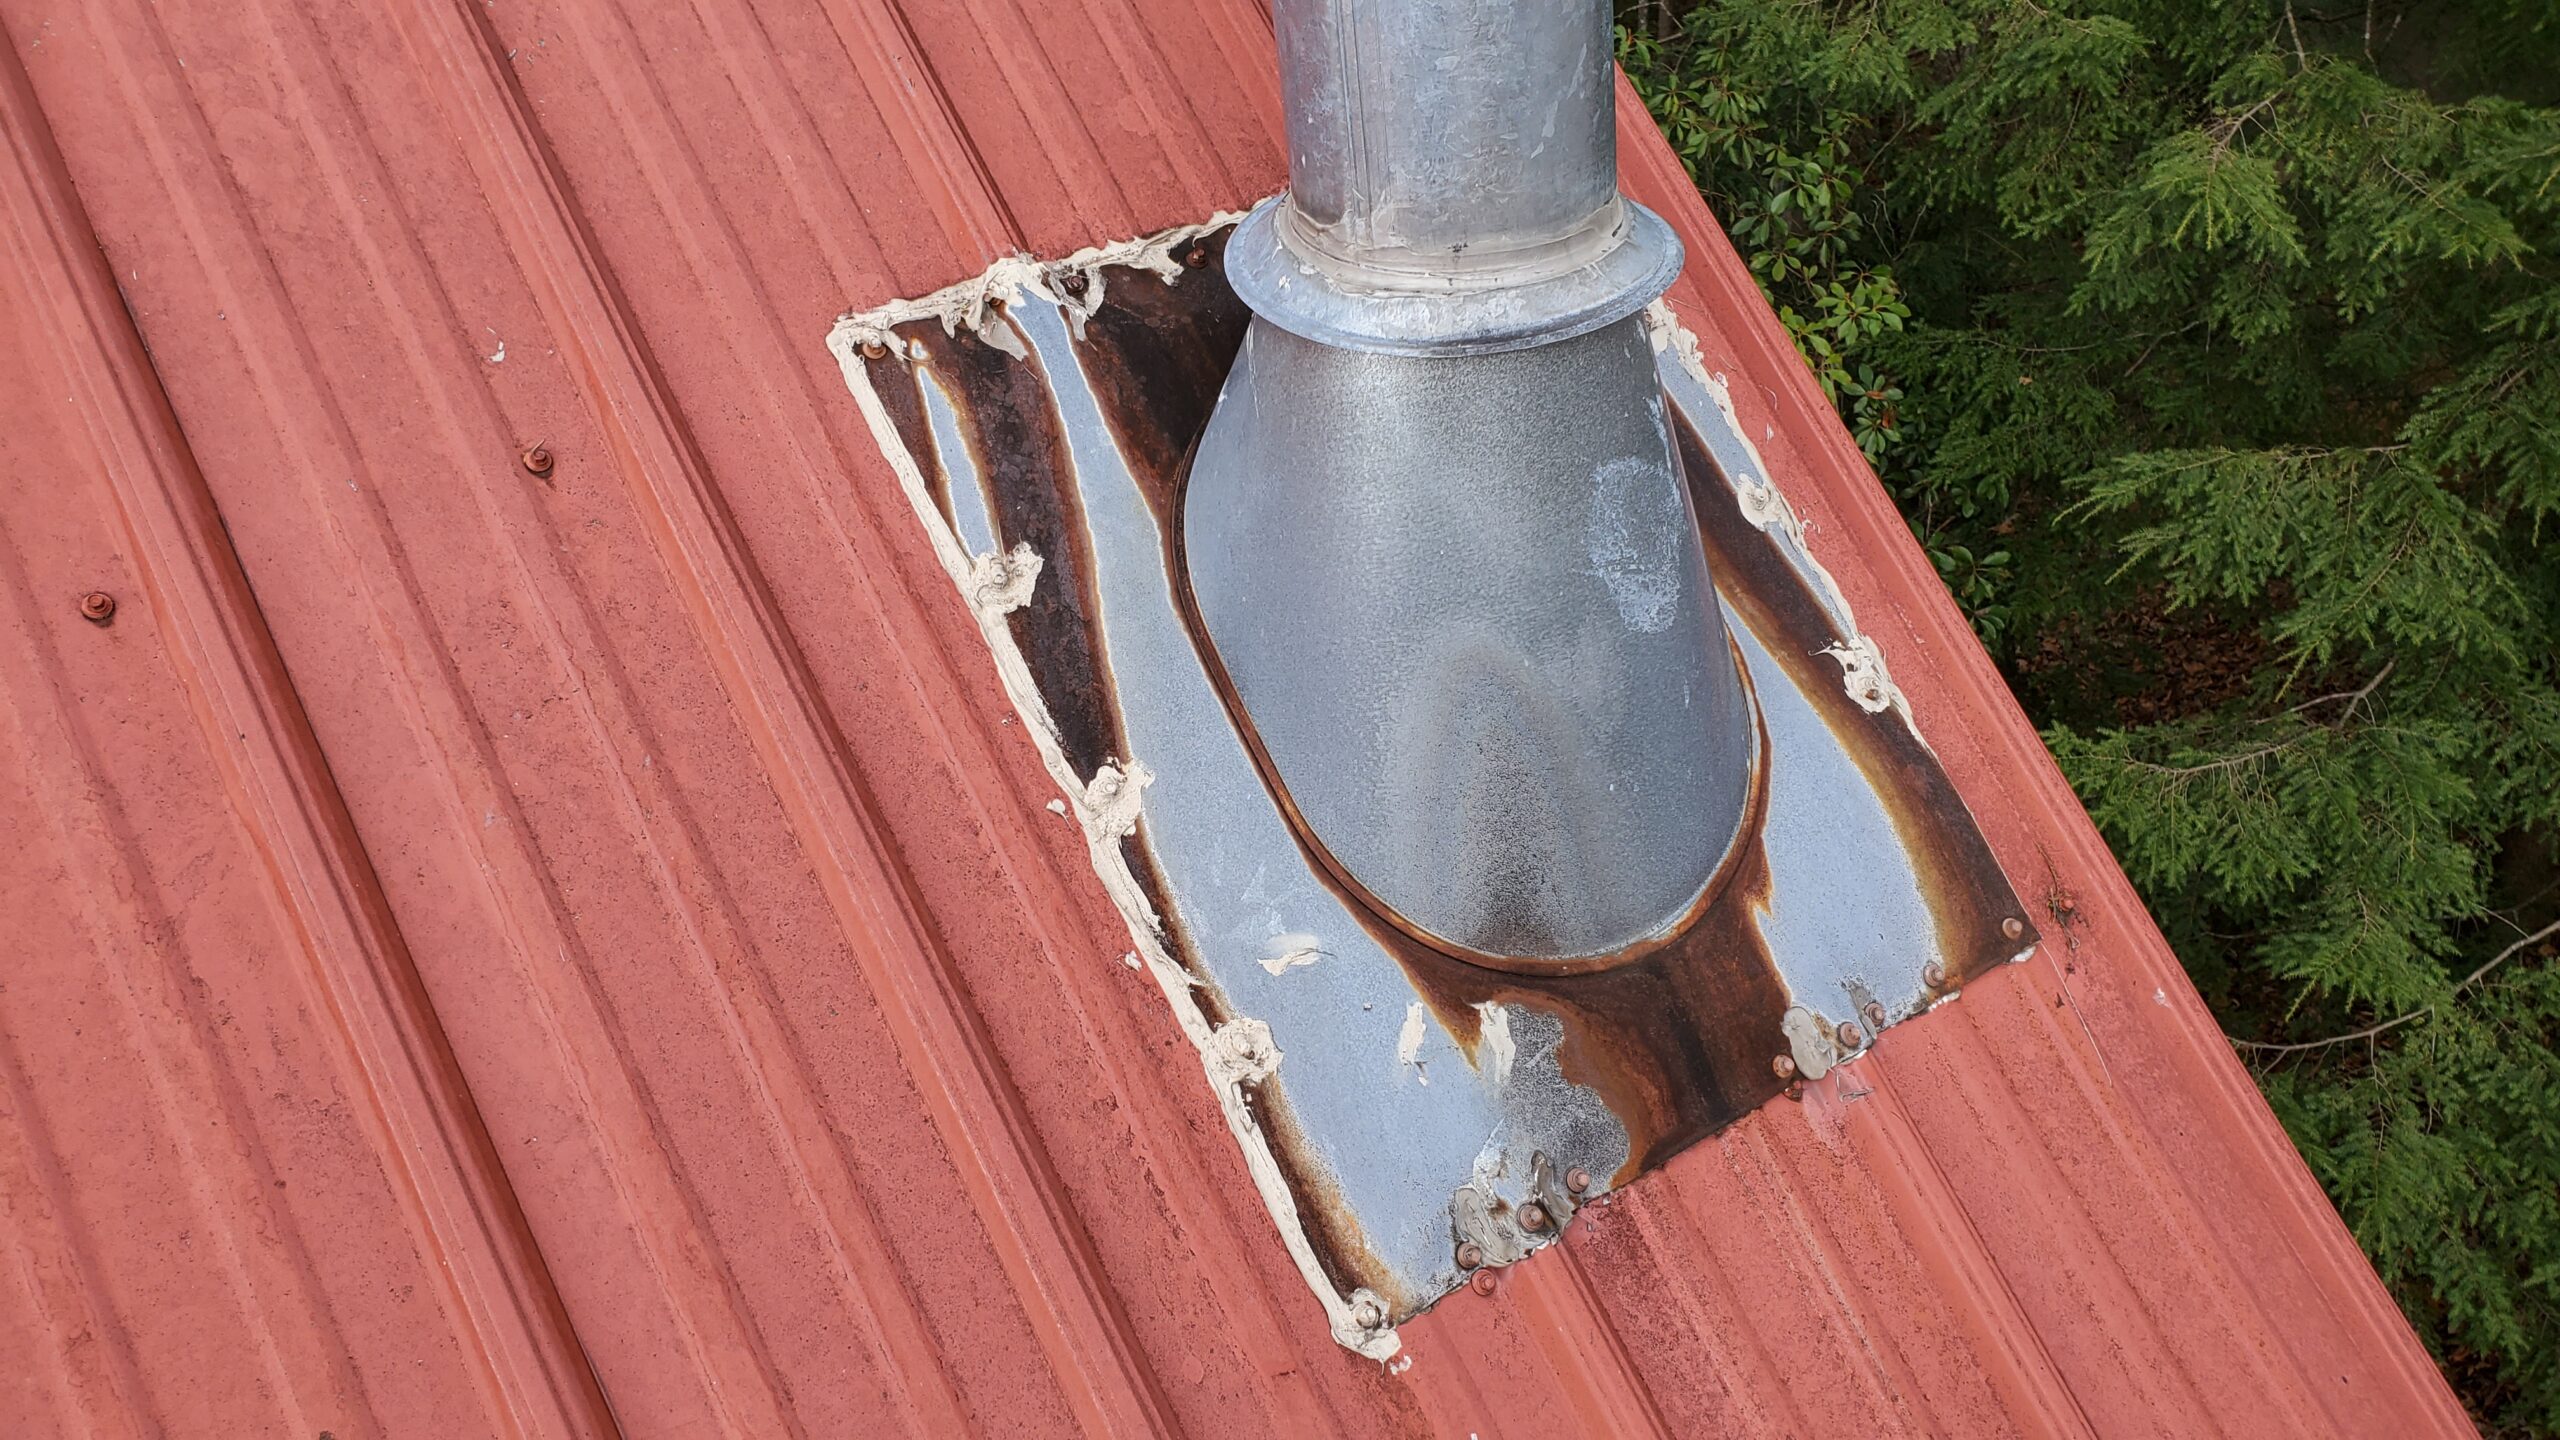 This is a picture of a metal chimney vent ontop of a red metal roof that is rusted and old